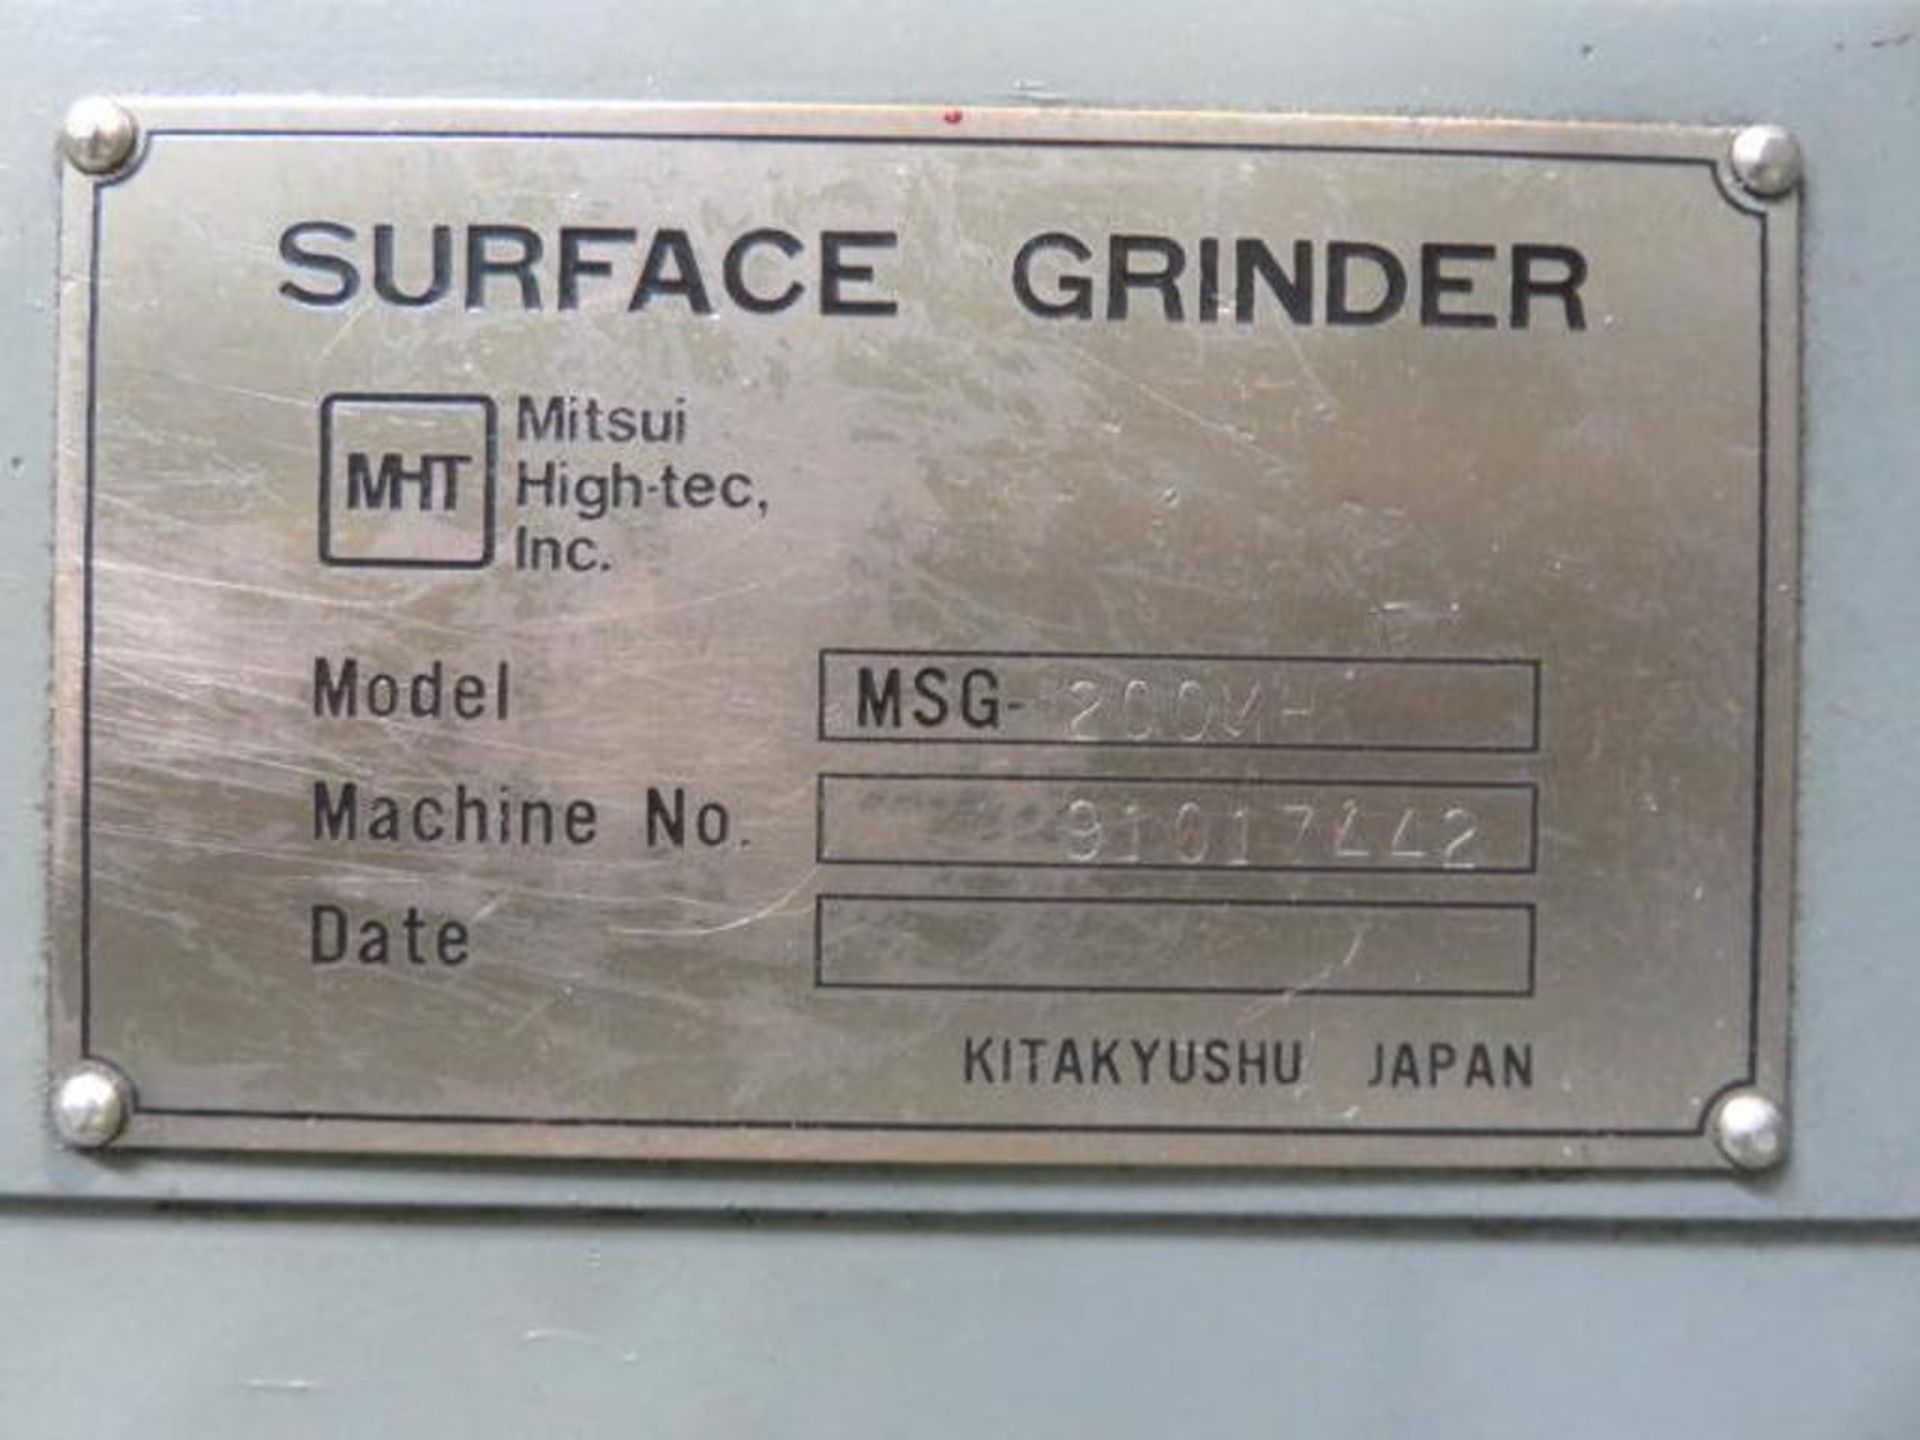 MHT 6 in. x 12 in. Hand Feed Surface Grinder Model MSG-200MH, S/N 91017442 (1991), Walker Chuck Cont - Image 2 of 2